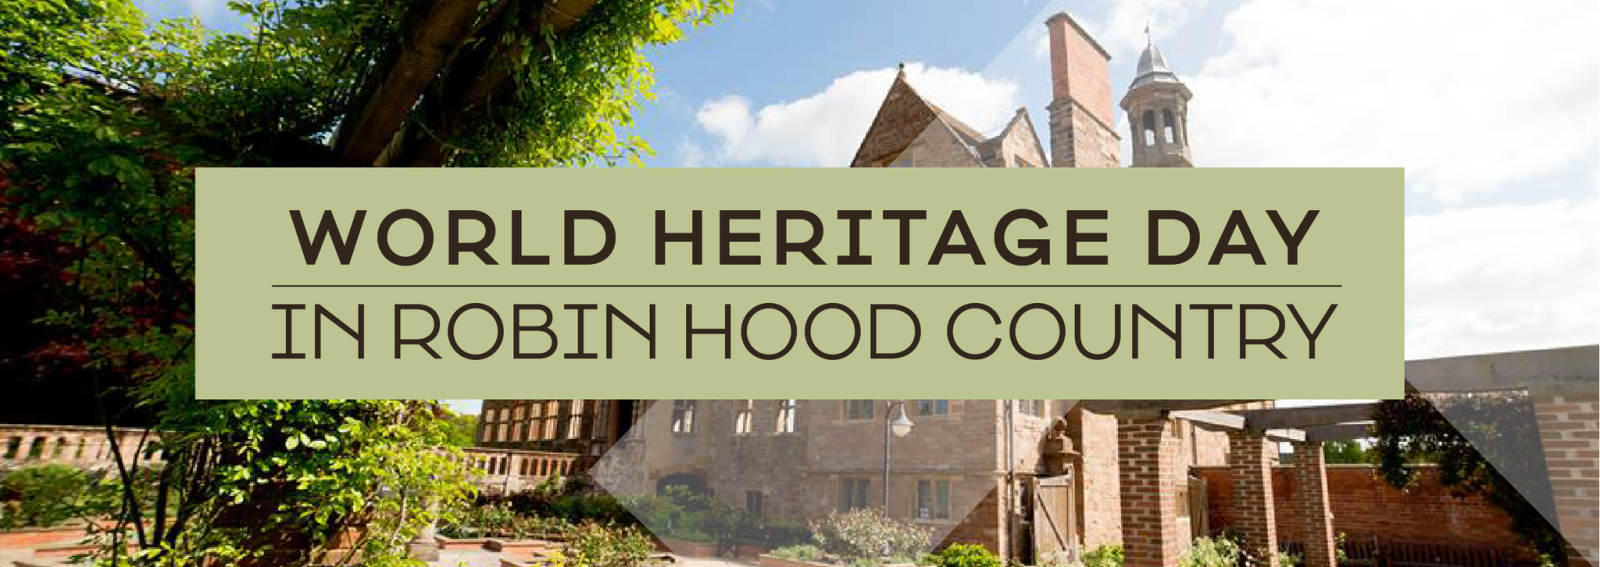 World Heritage Day In Robin Hood Country